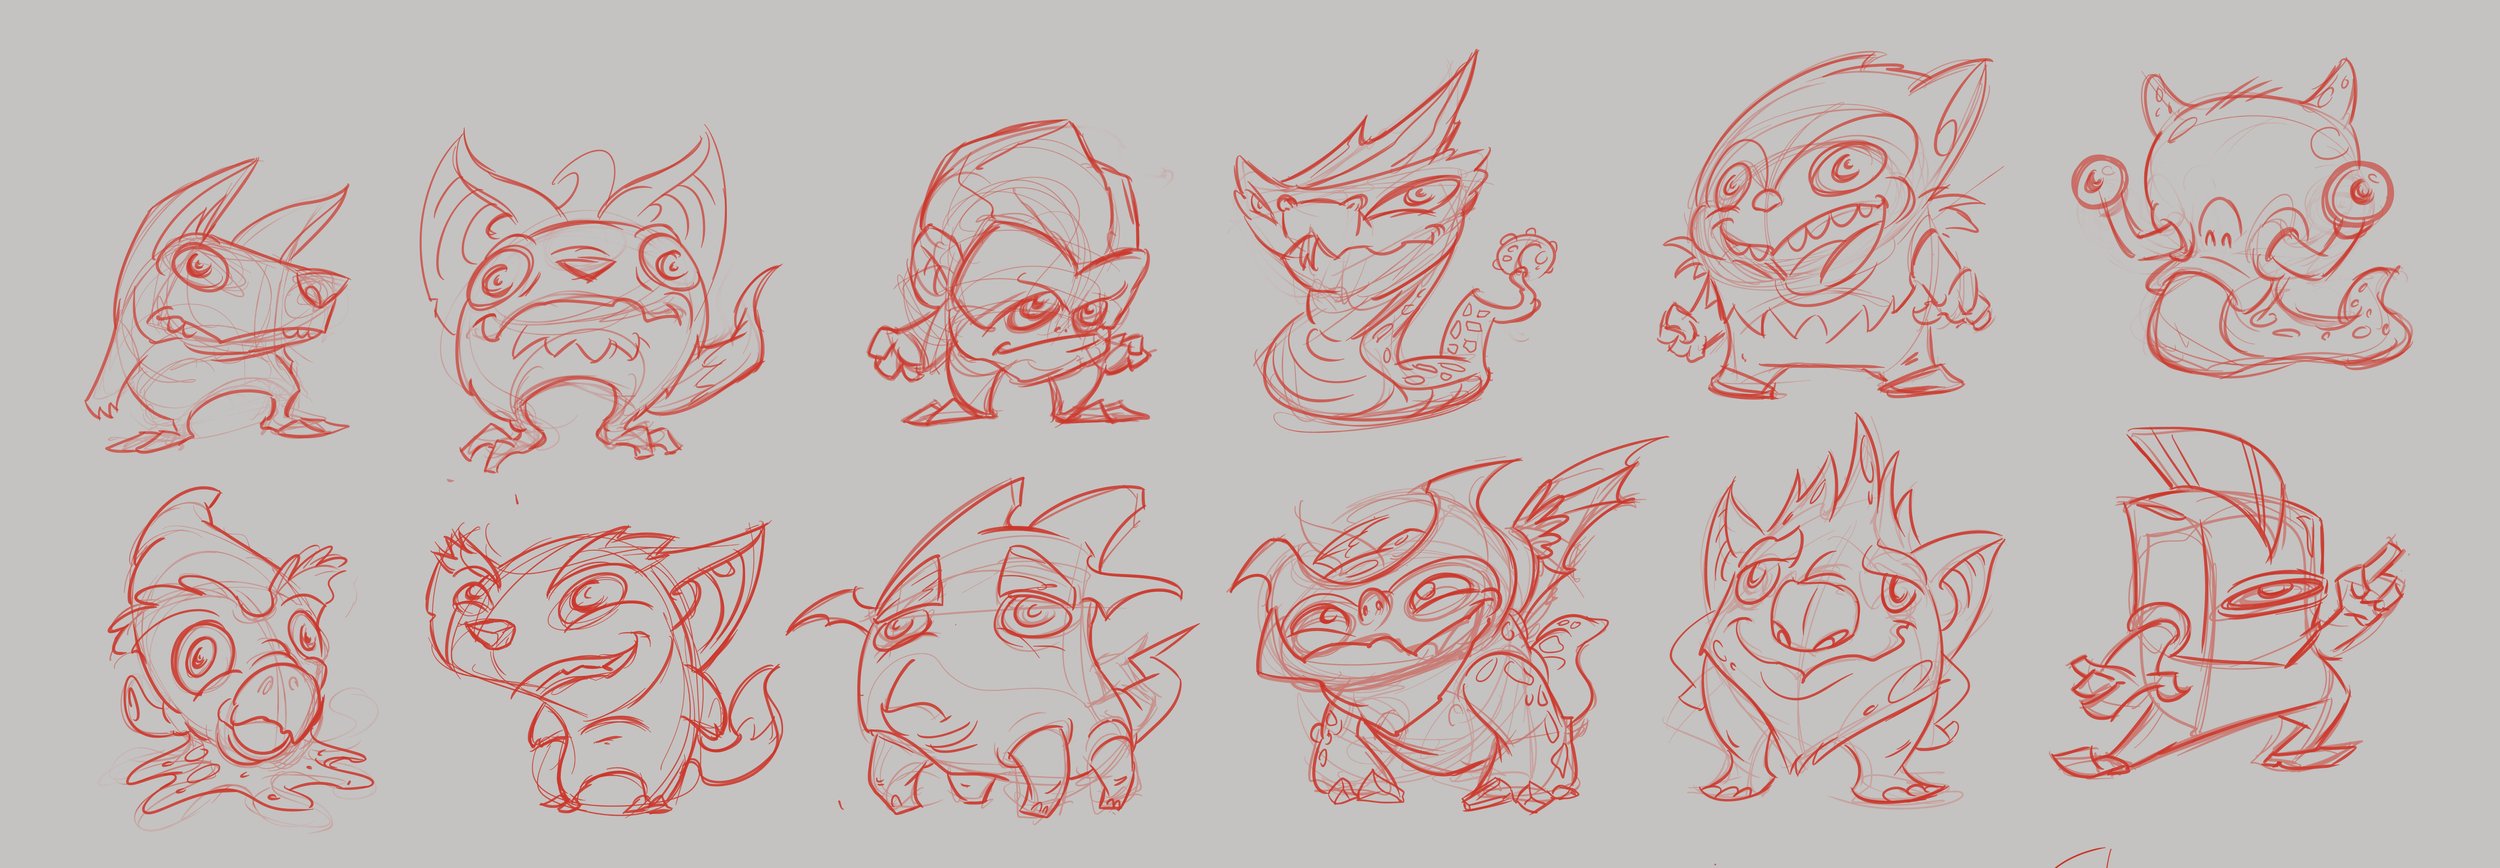 Mobile Game Beasties Concepts